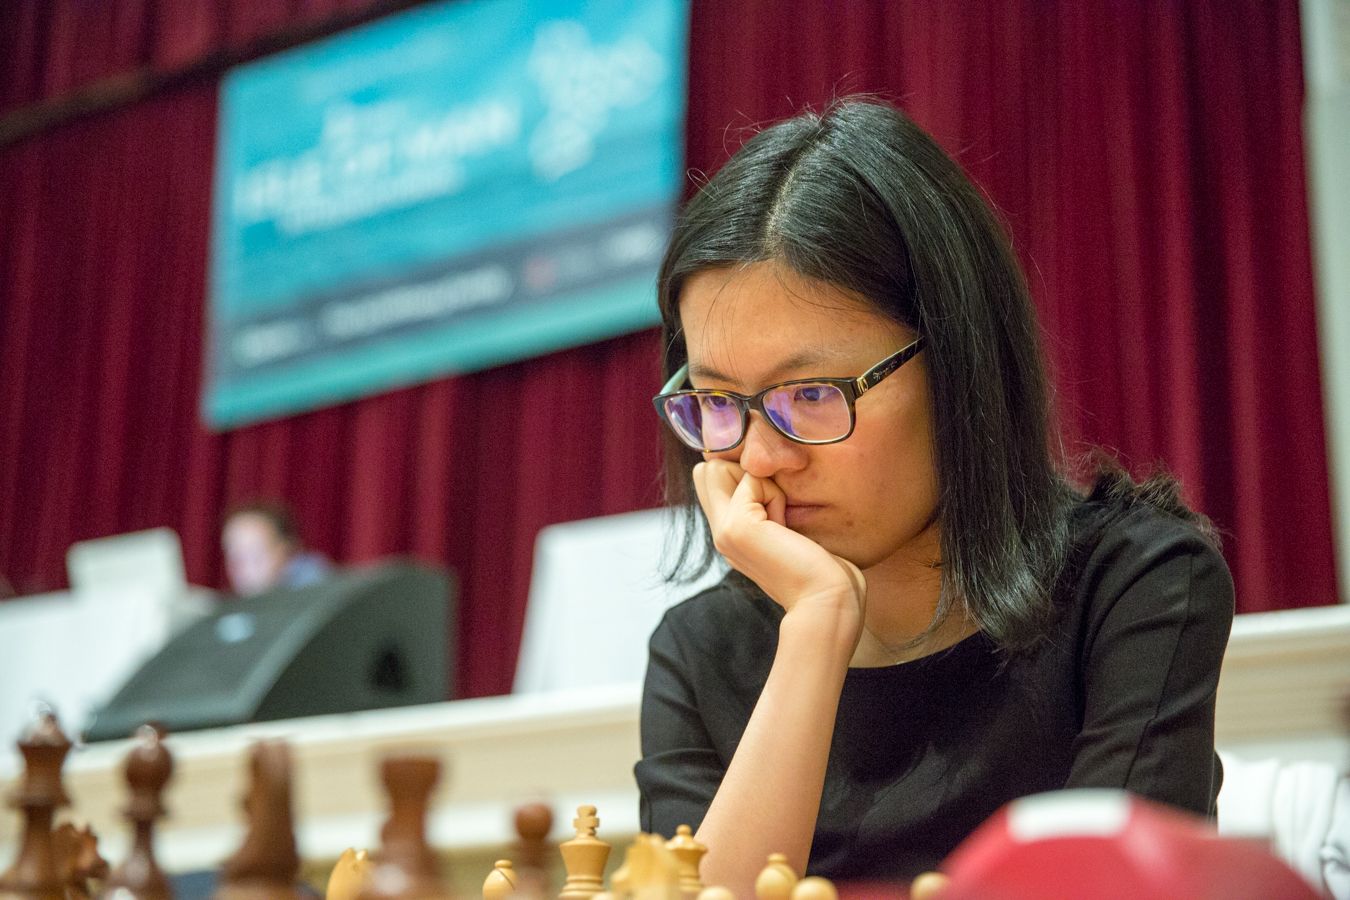 Wei Yi : The World’s Youngest Super Grandmaster - Chess